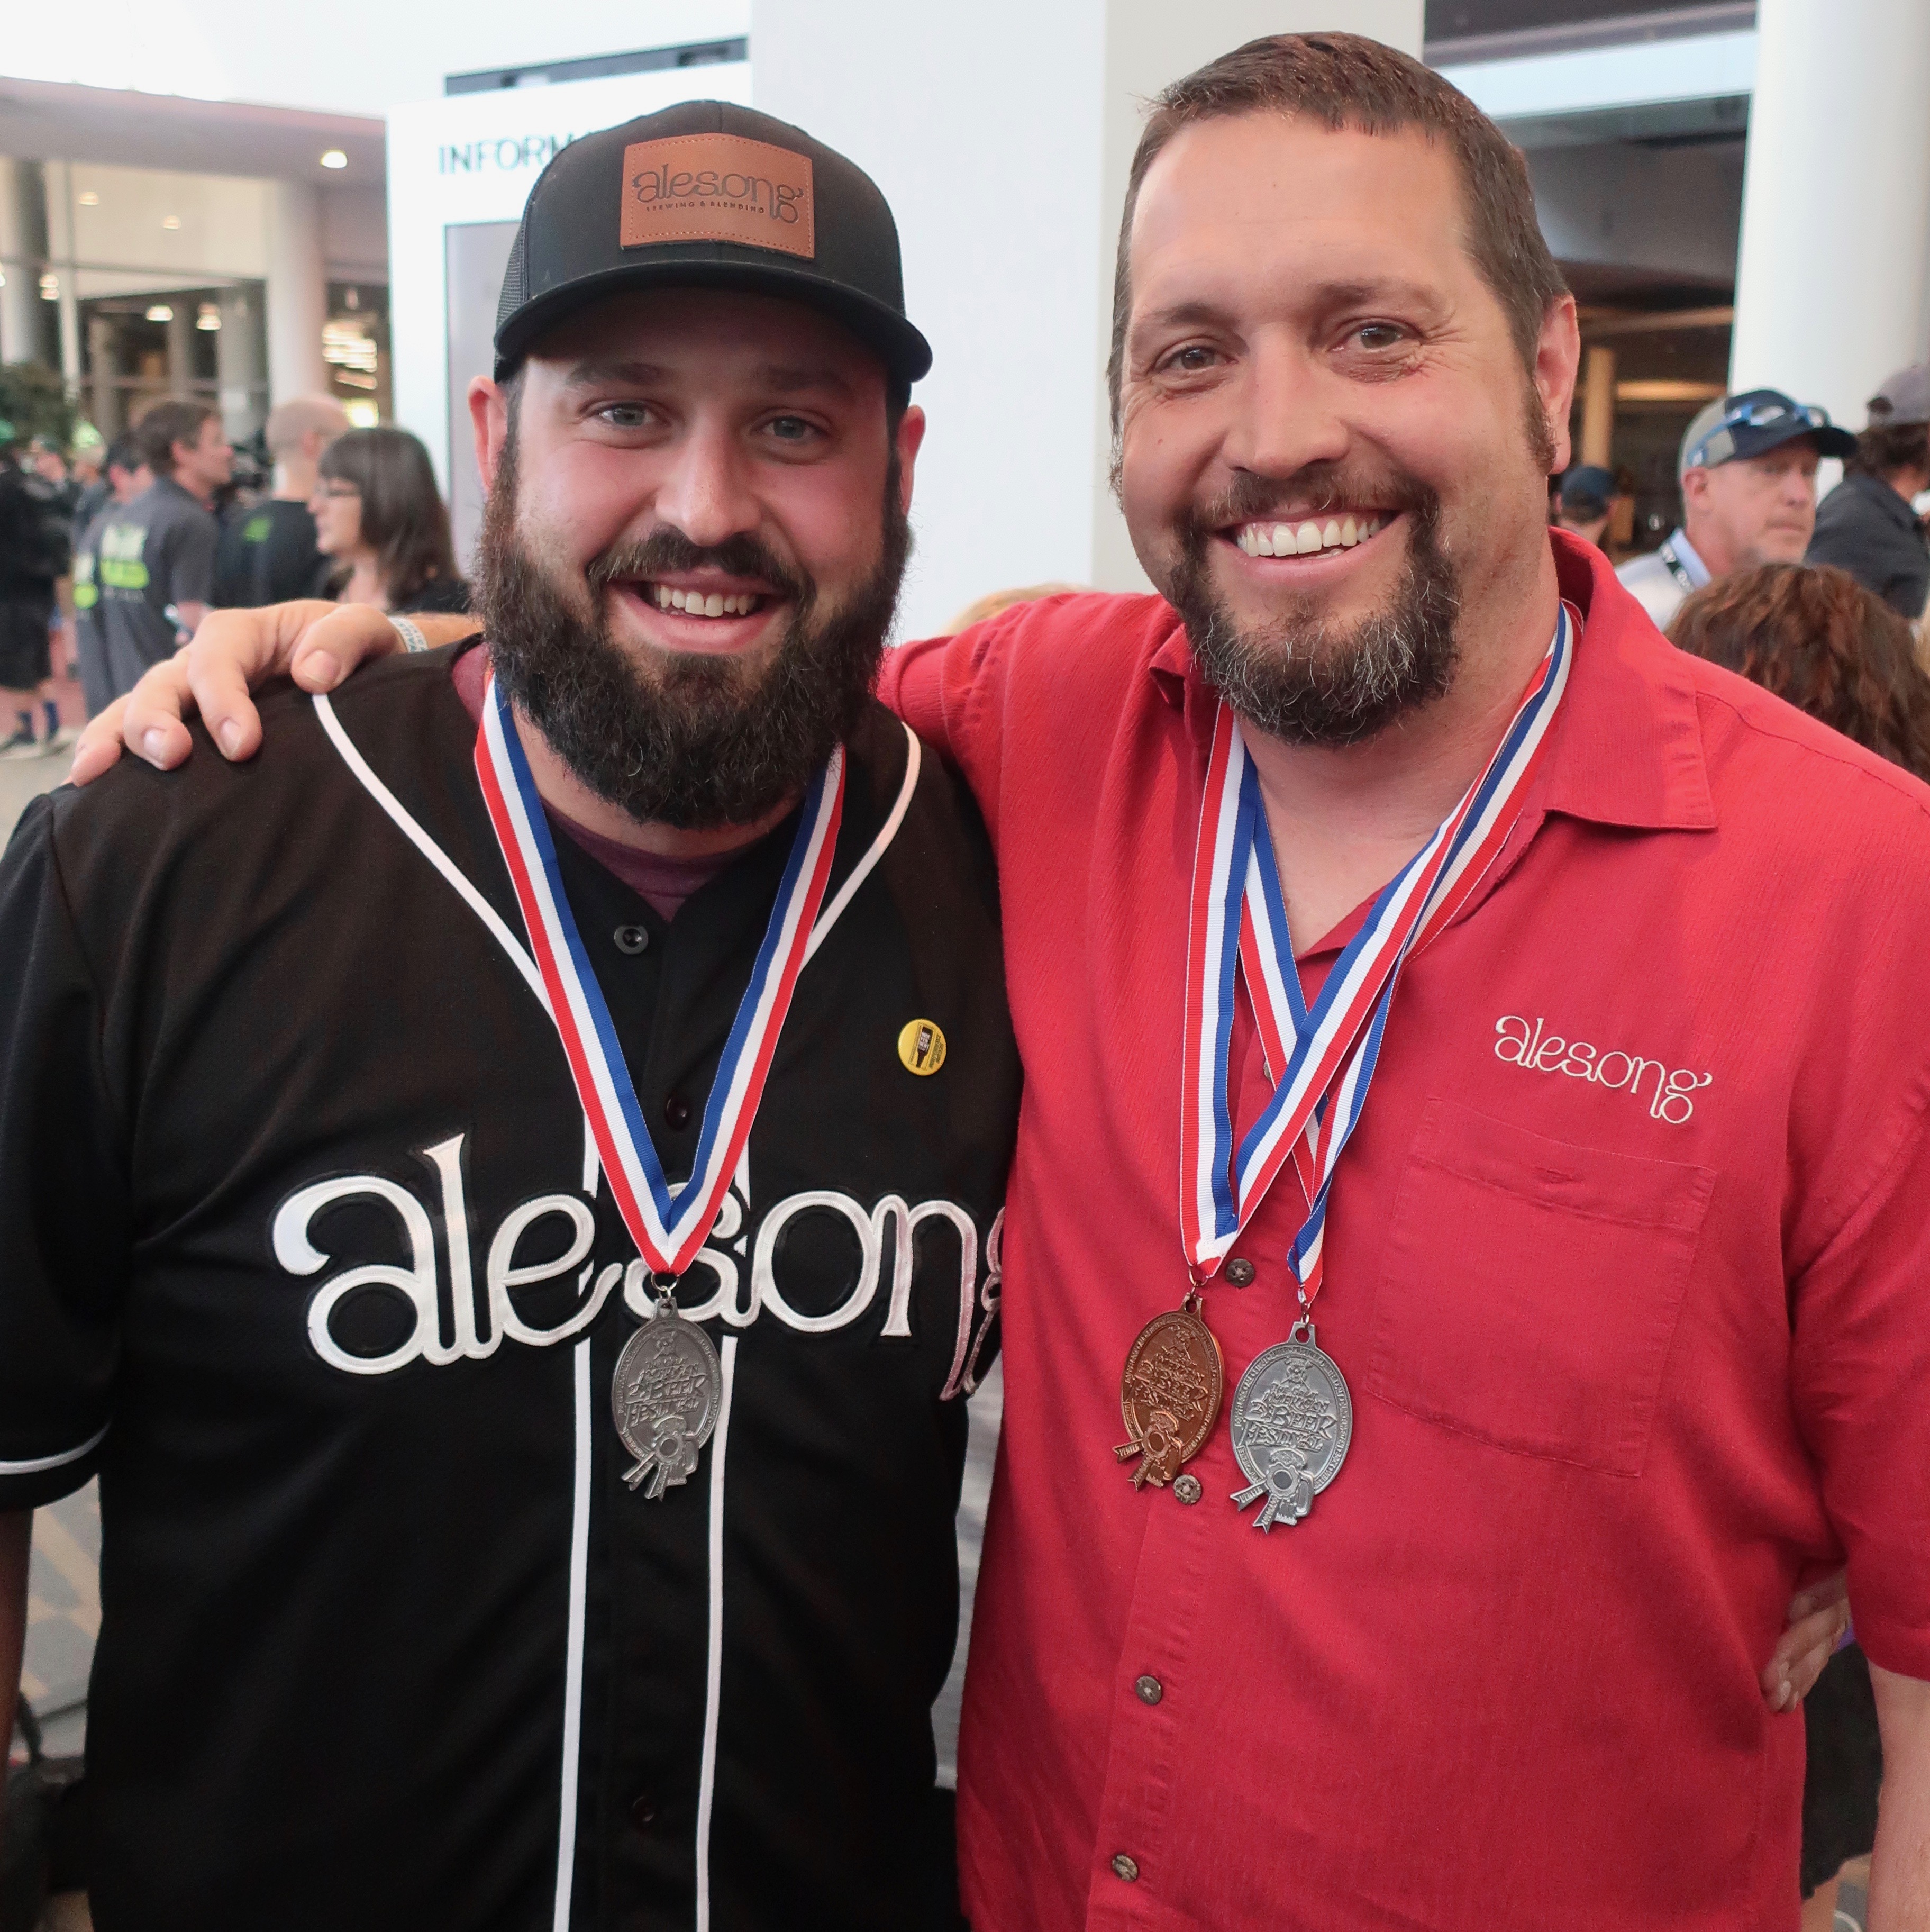 Alesong Brewing & Blending win three medals at the 2018 Great American Beer Festival. Pictured are Brian Coombs and Matt Van Wyk.